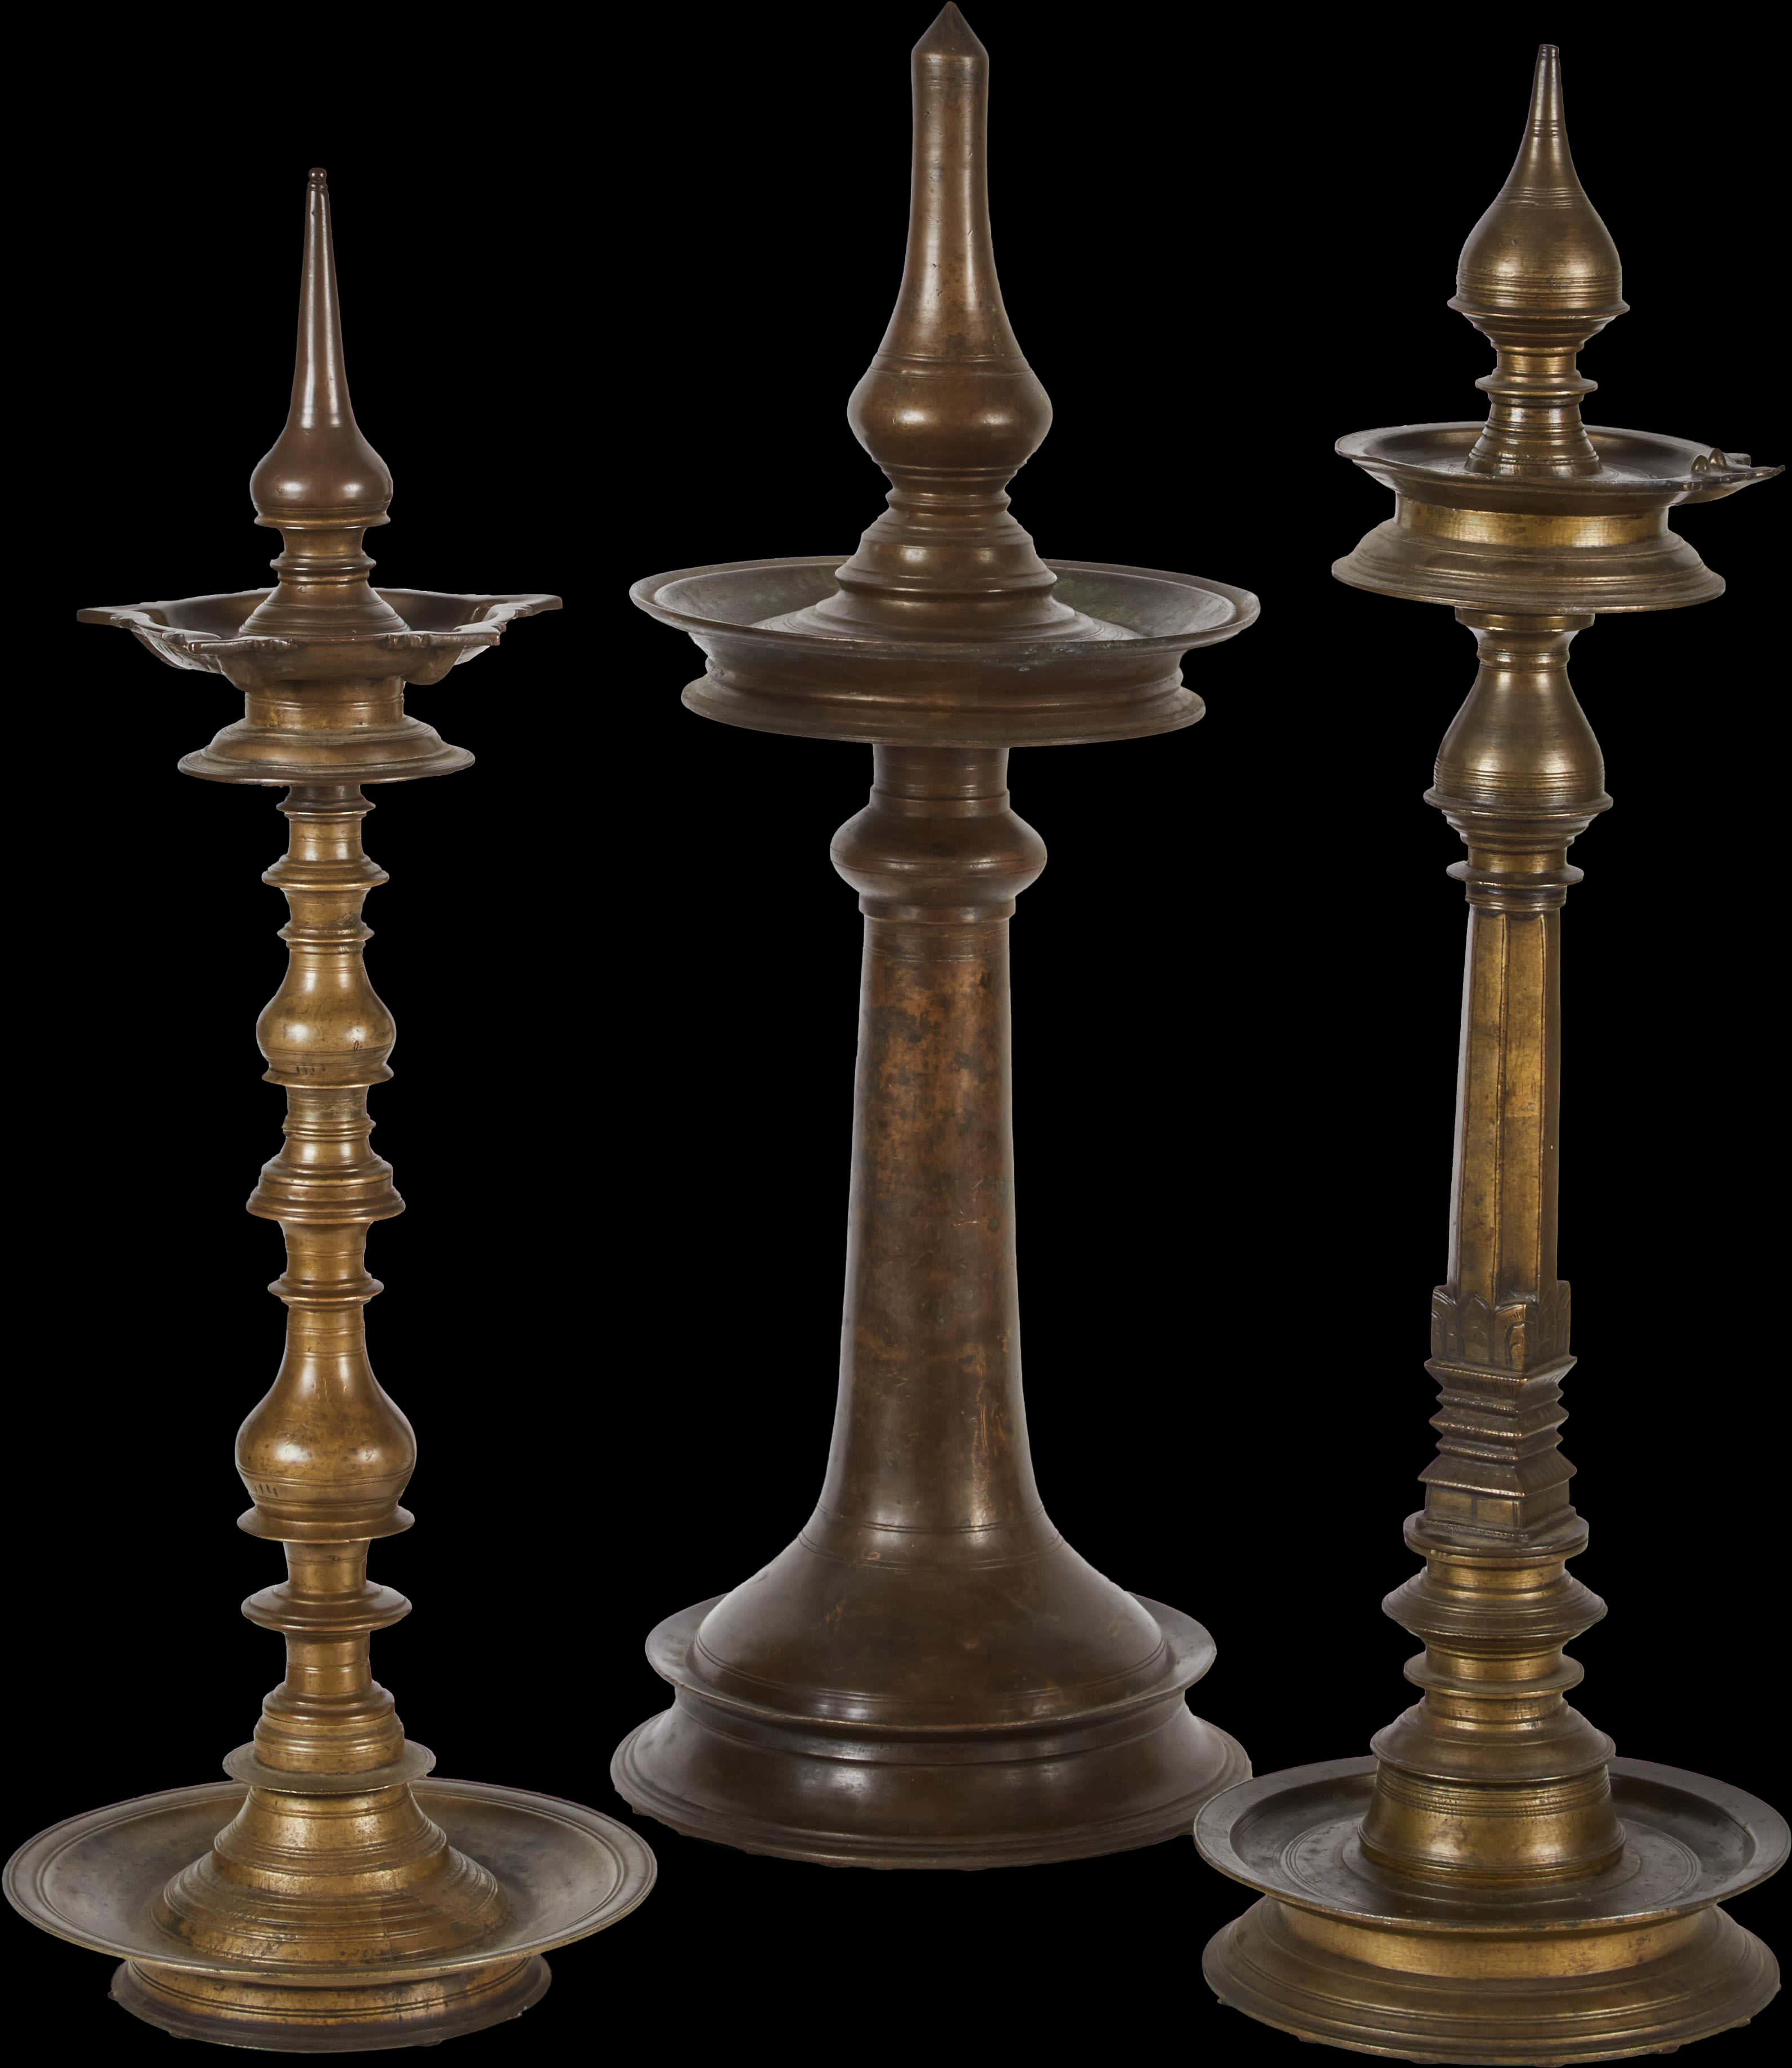 A Group Of Antique Candlesticks